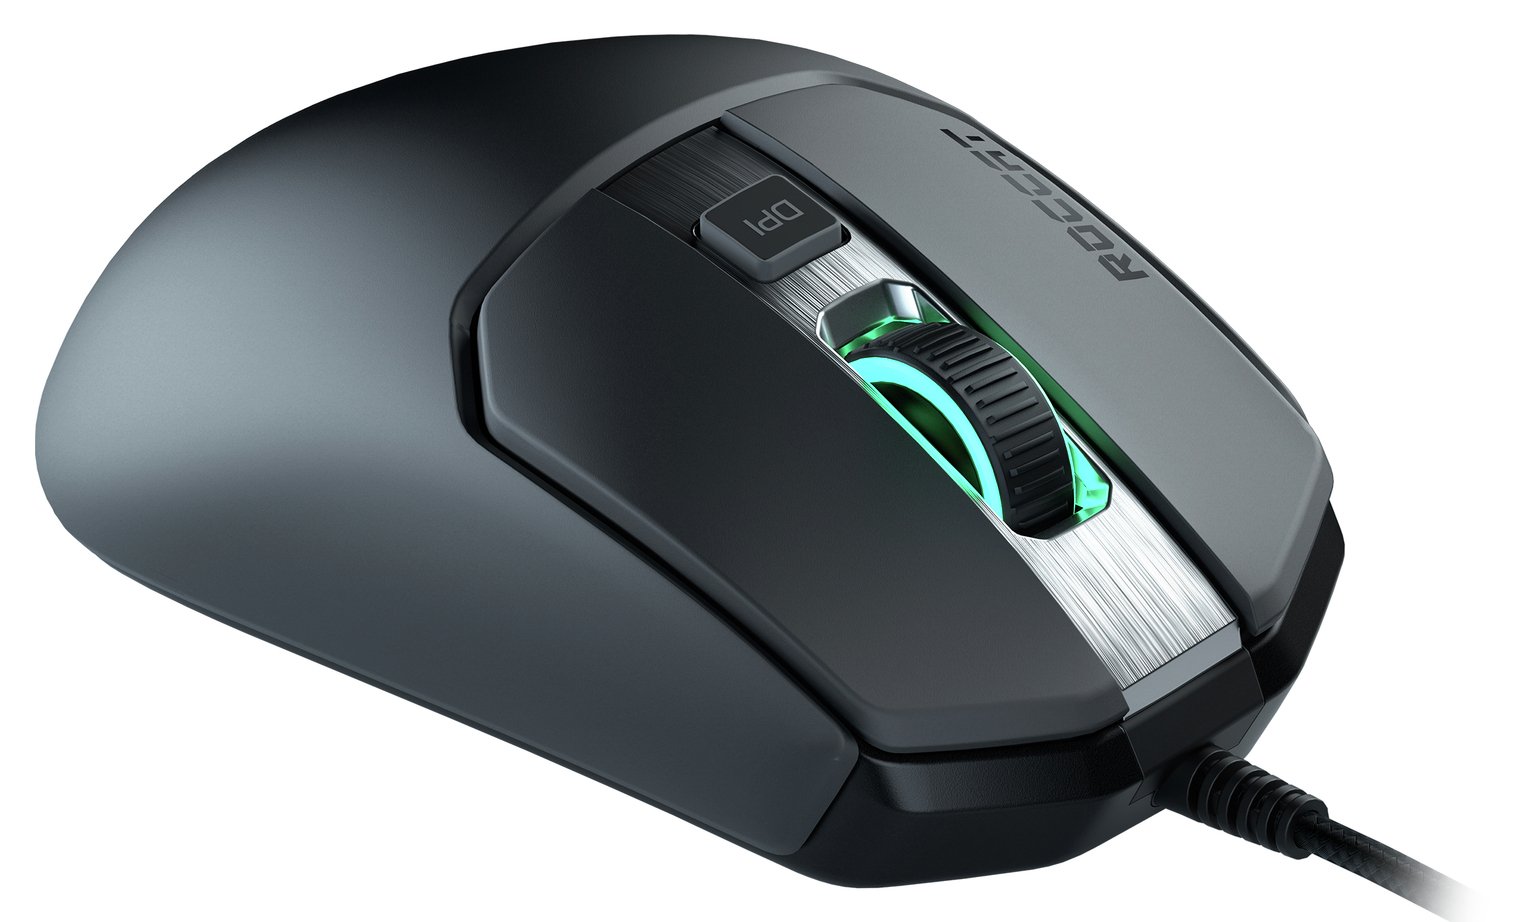 Roccat Kain 120 Aimo RGB Wired Gaming Mouse Review